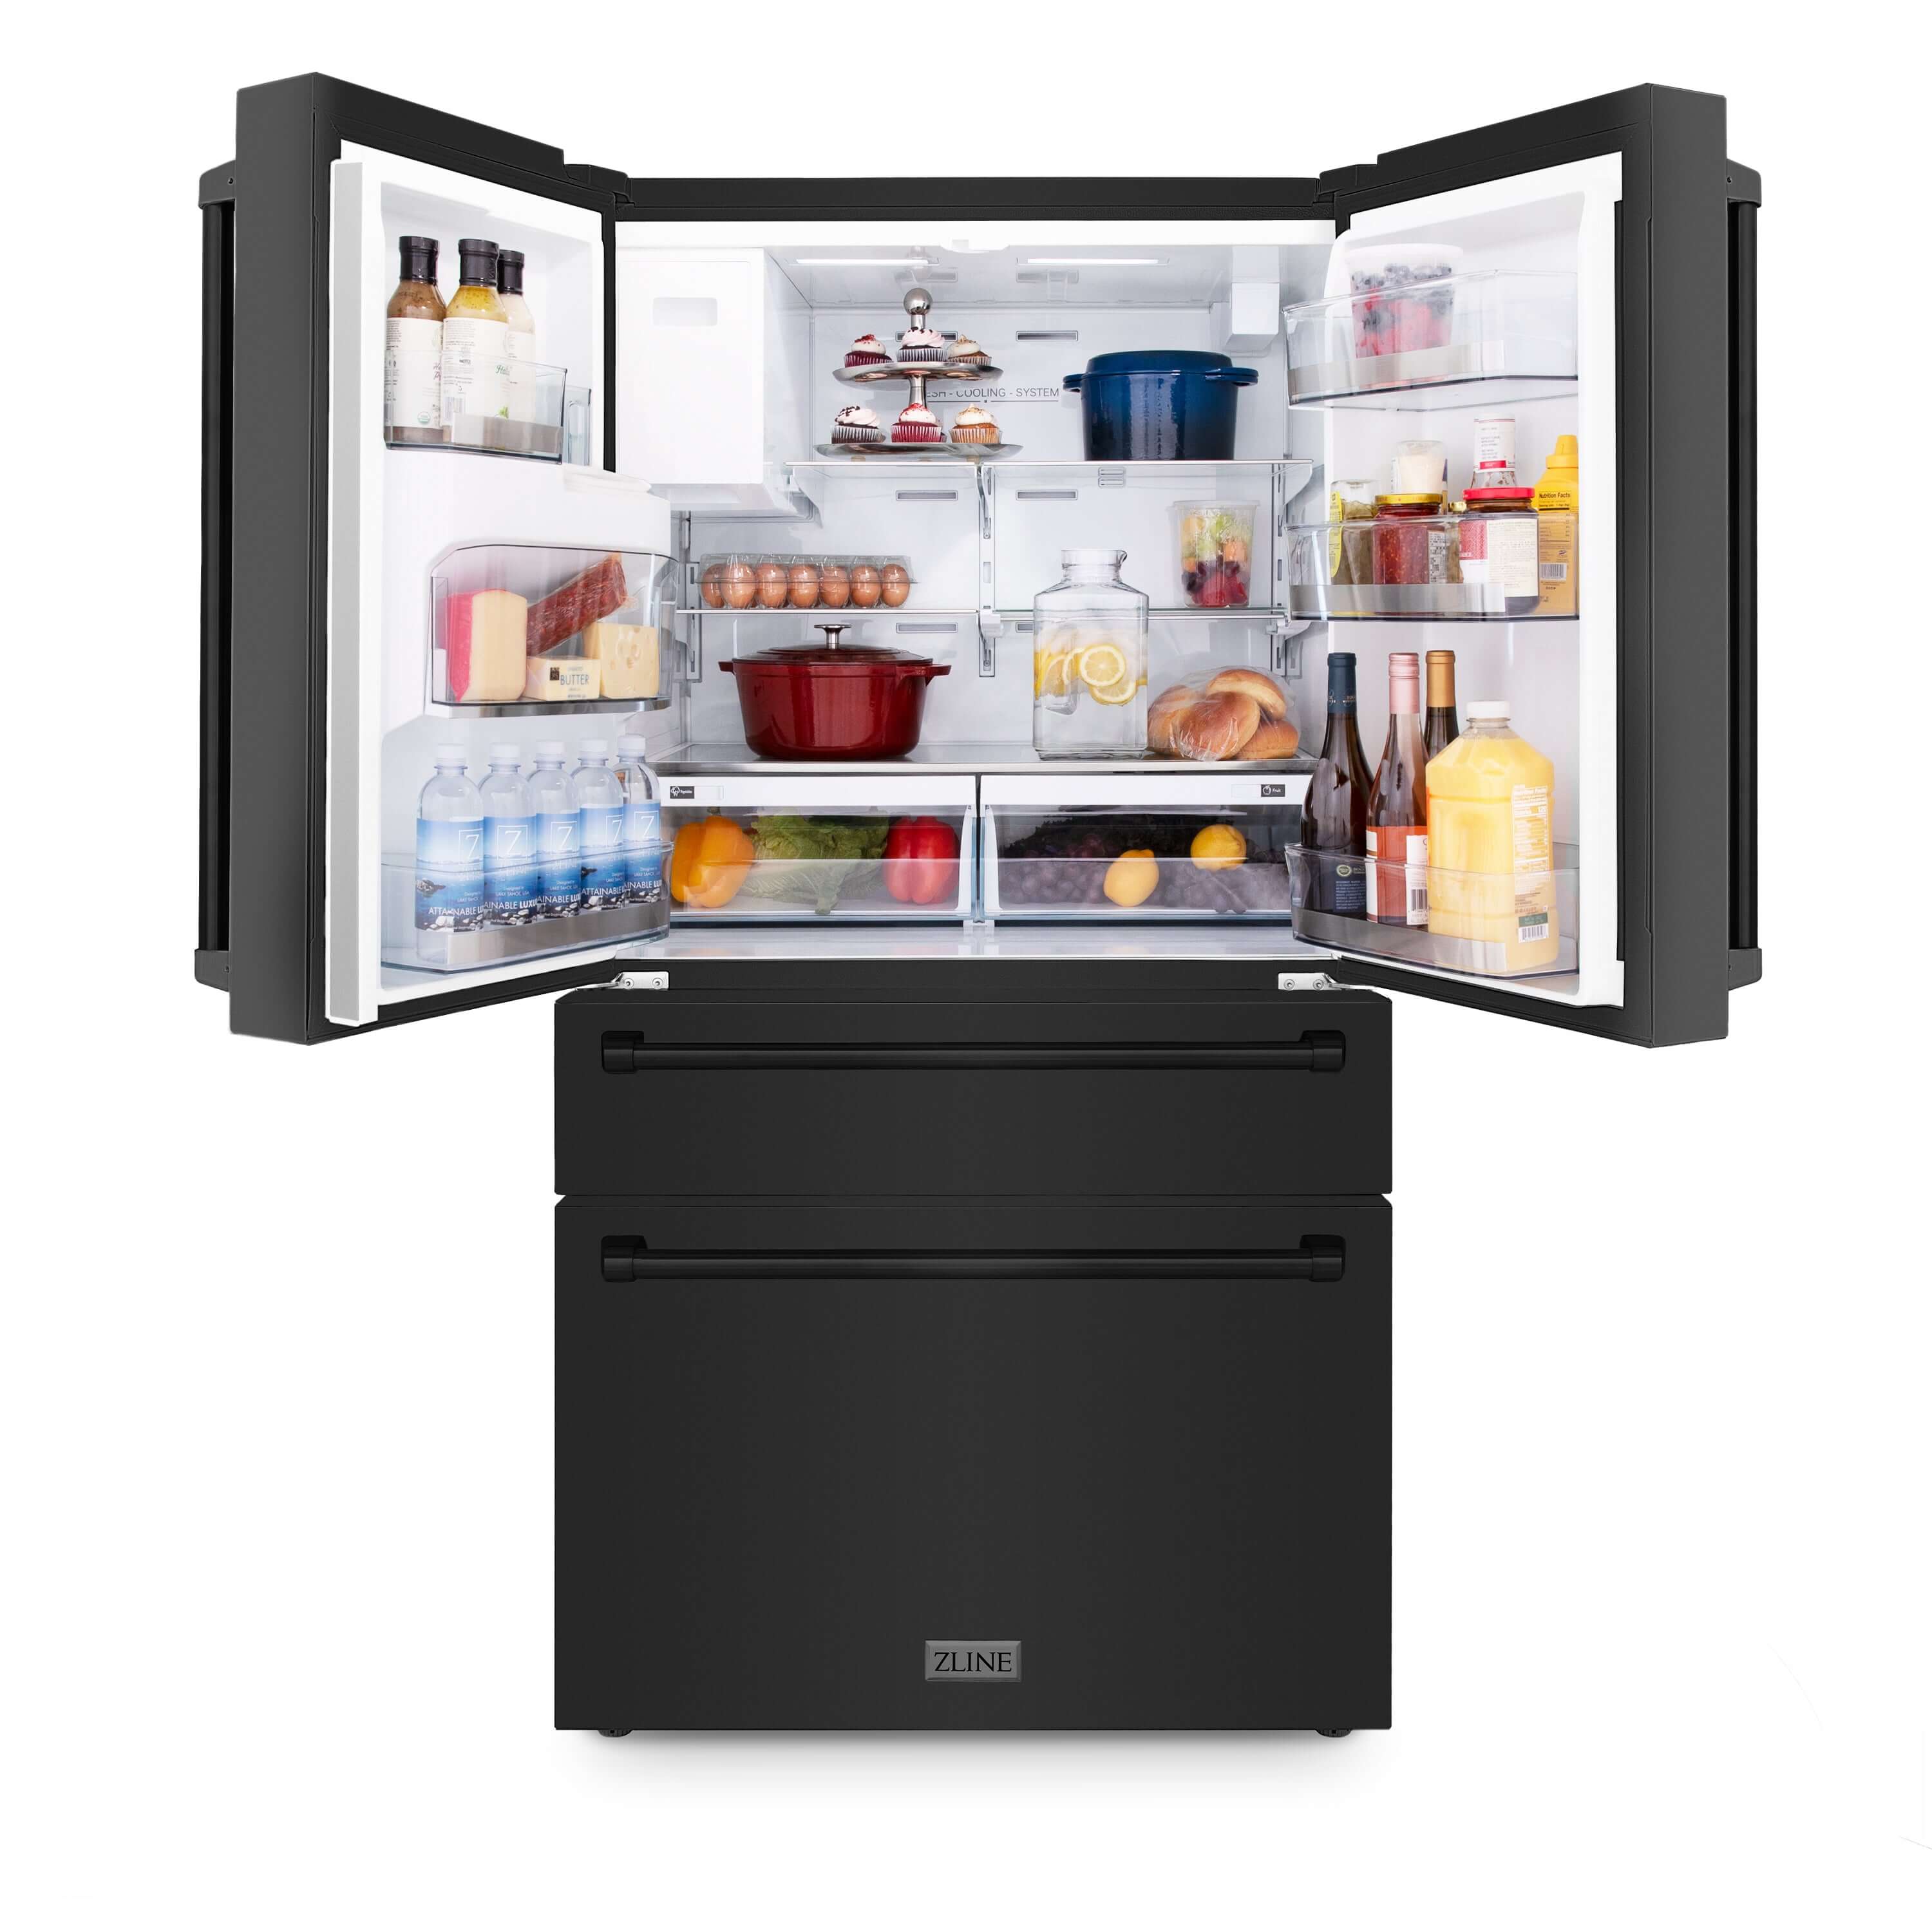 ZLINE 36 in. 21.6 cu. ft Freestanding French Door Fingerprint Resistant Refrigerator with External Water and Ice Dispenser in Black Stainless Steel (RFM-W-36-BS) front, open with food on adjustable shelving inside refrigeration compartment.